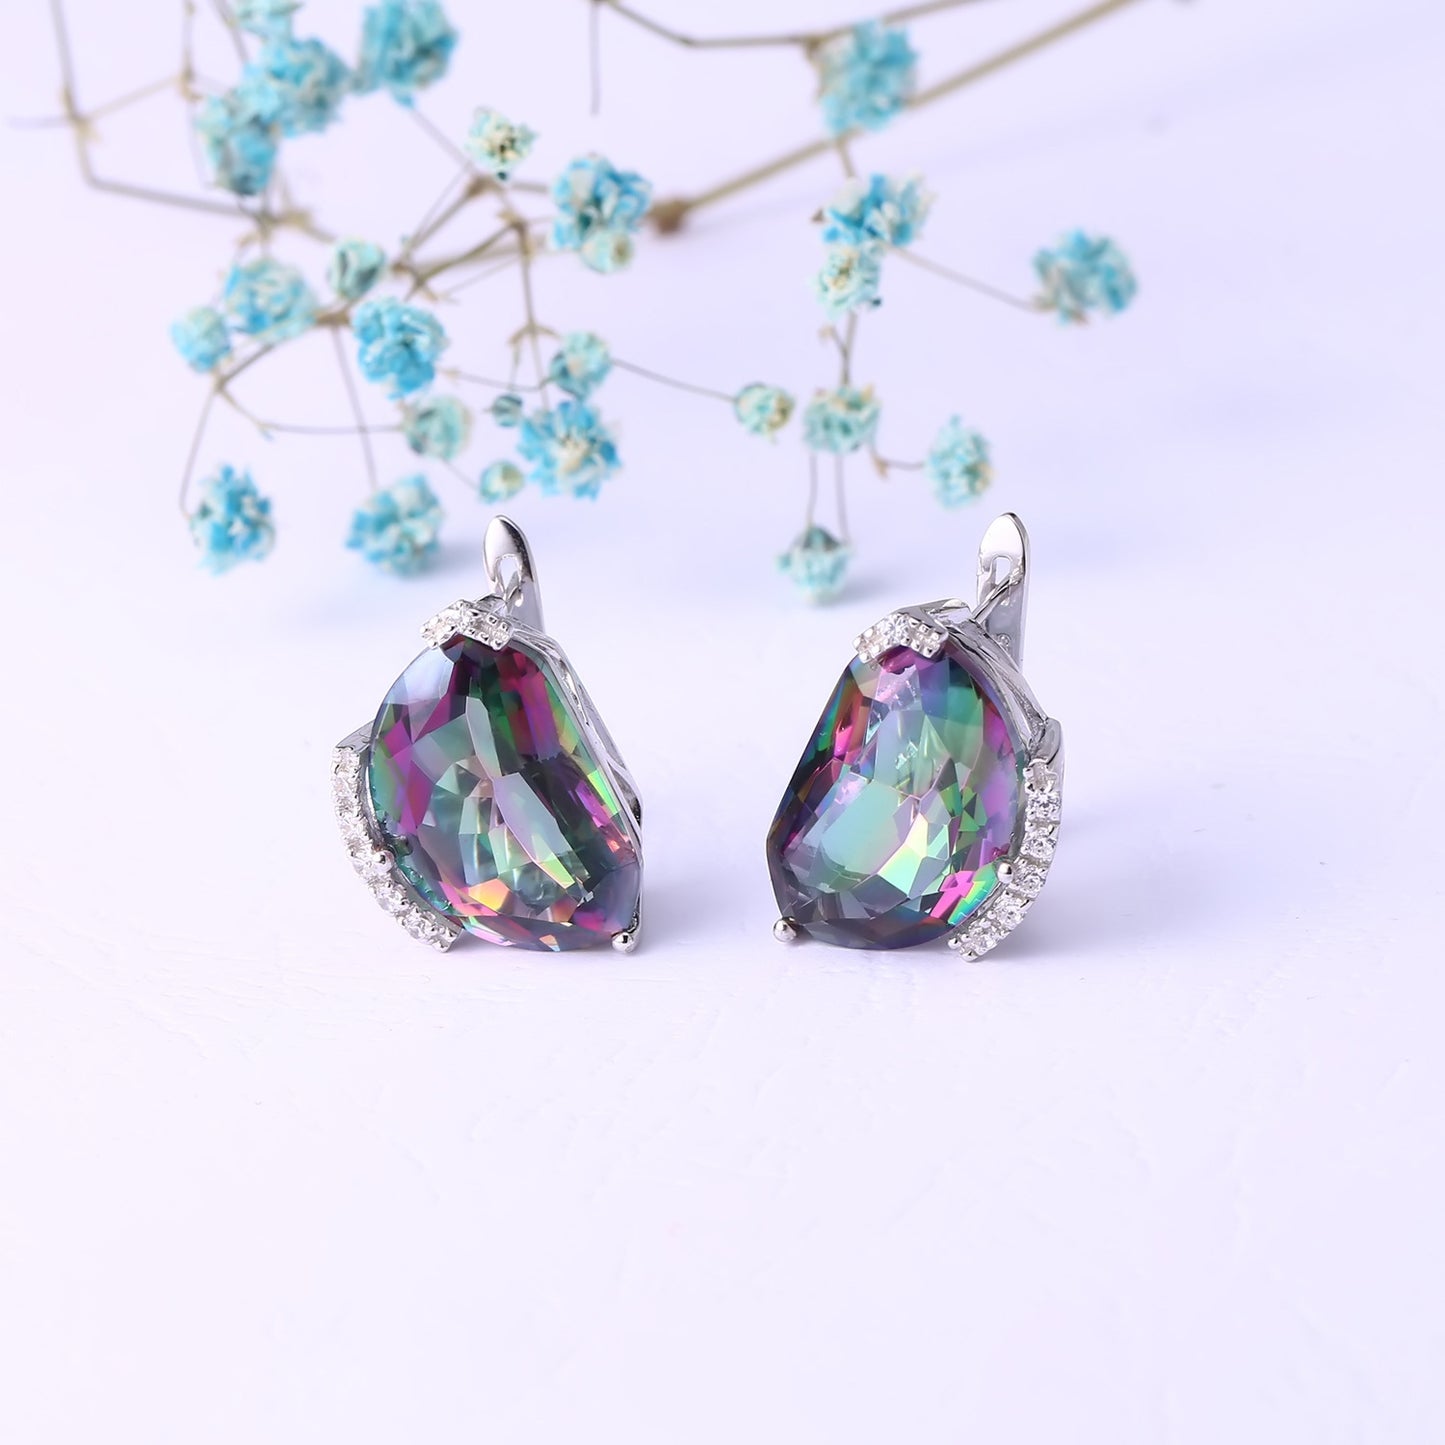 European Colourful Crystal Personality Special-shaped Silver Studs Earrings for Women